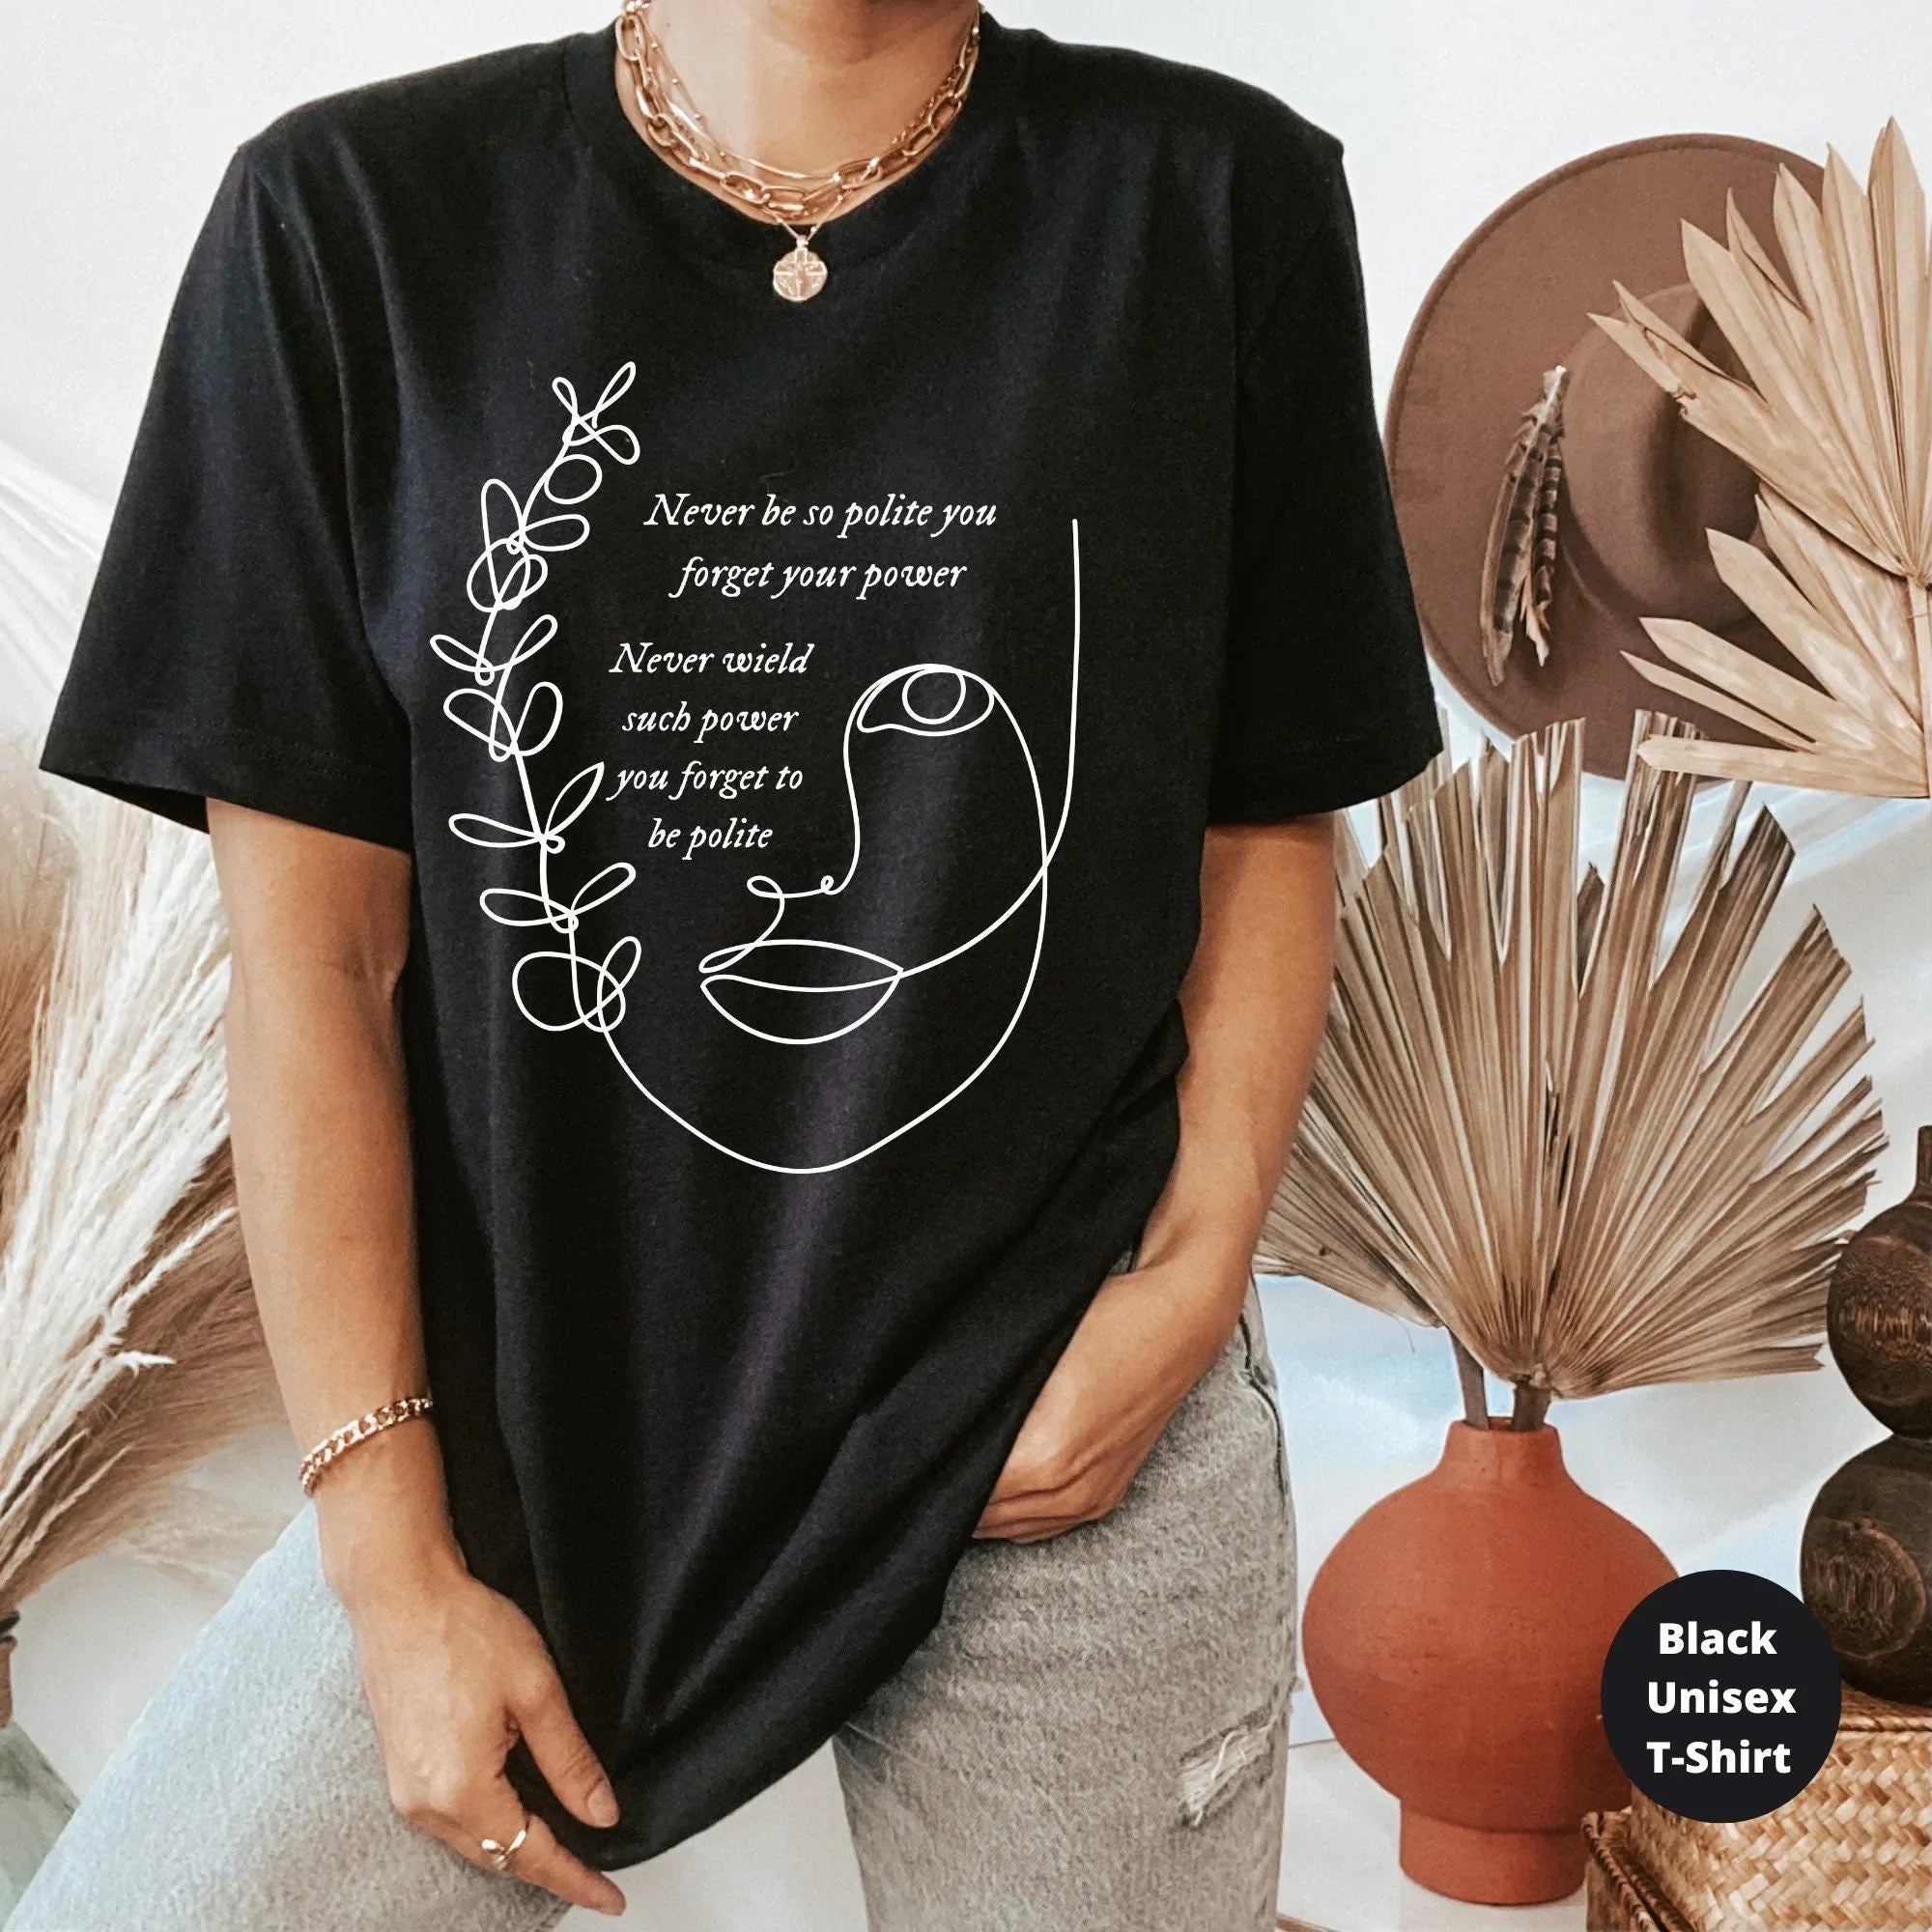 Meredith & Olivia Swift New Merch | New Taylor Connect